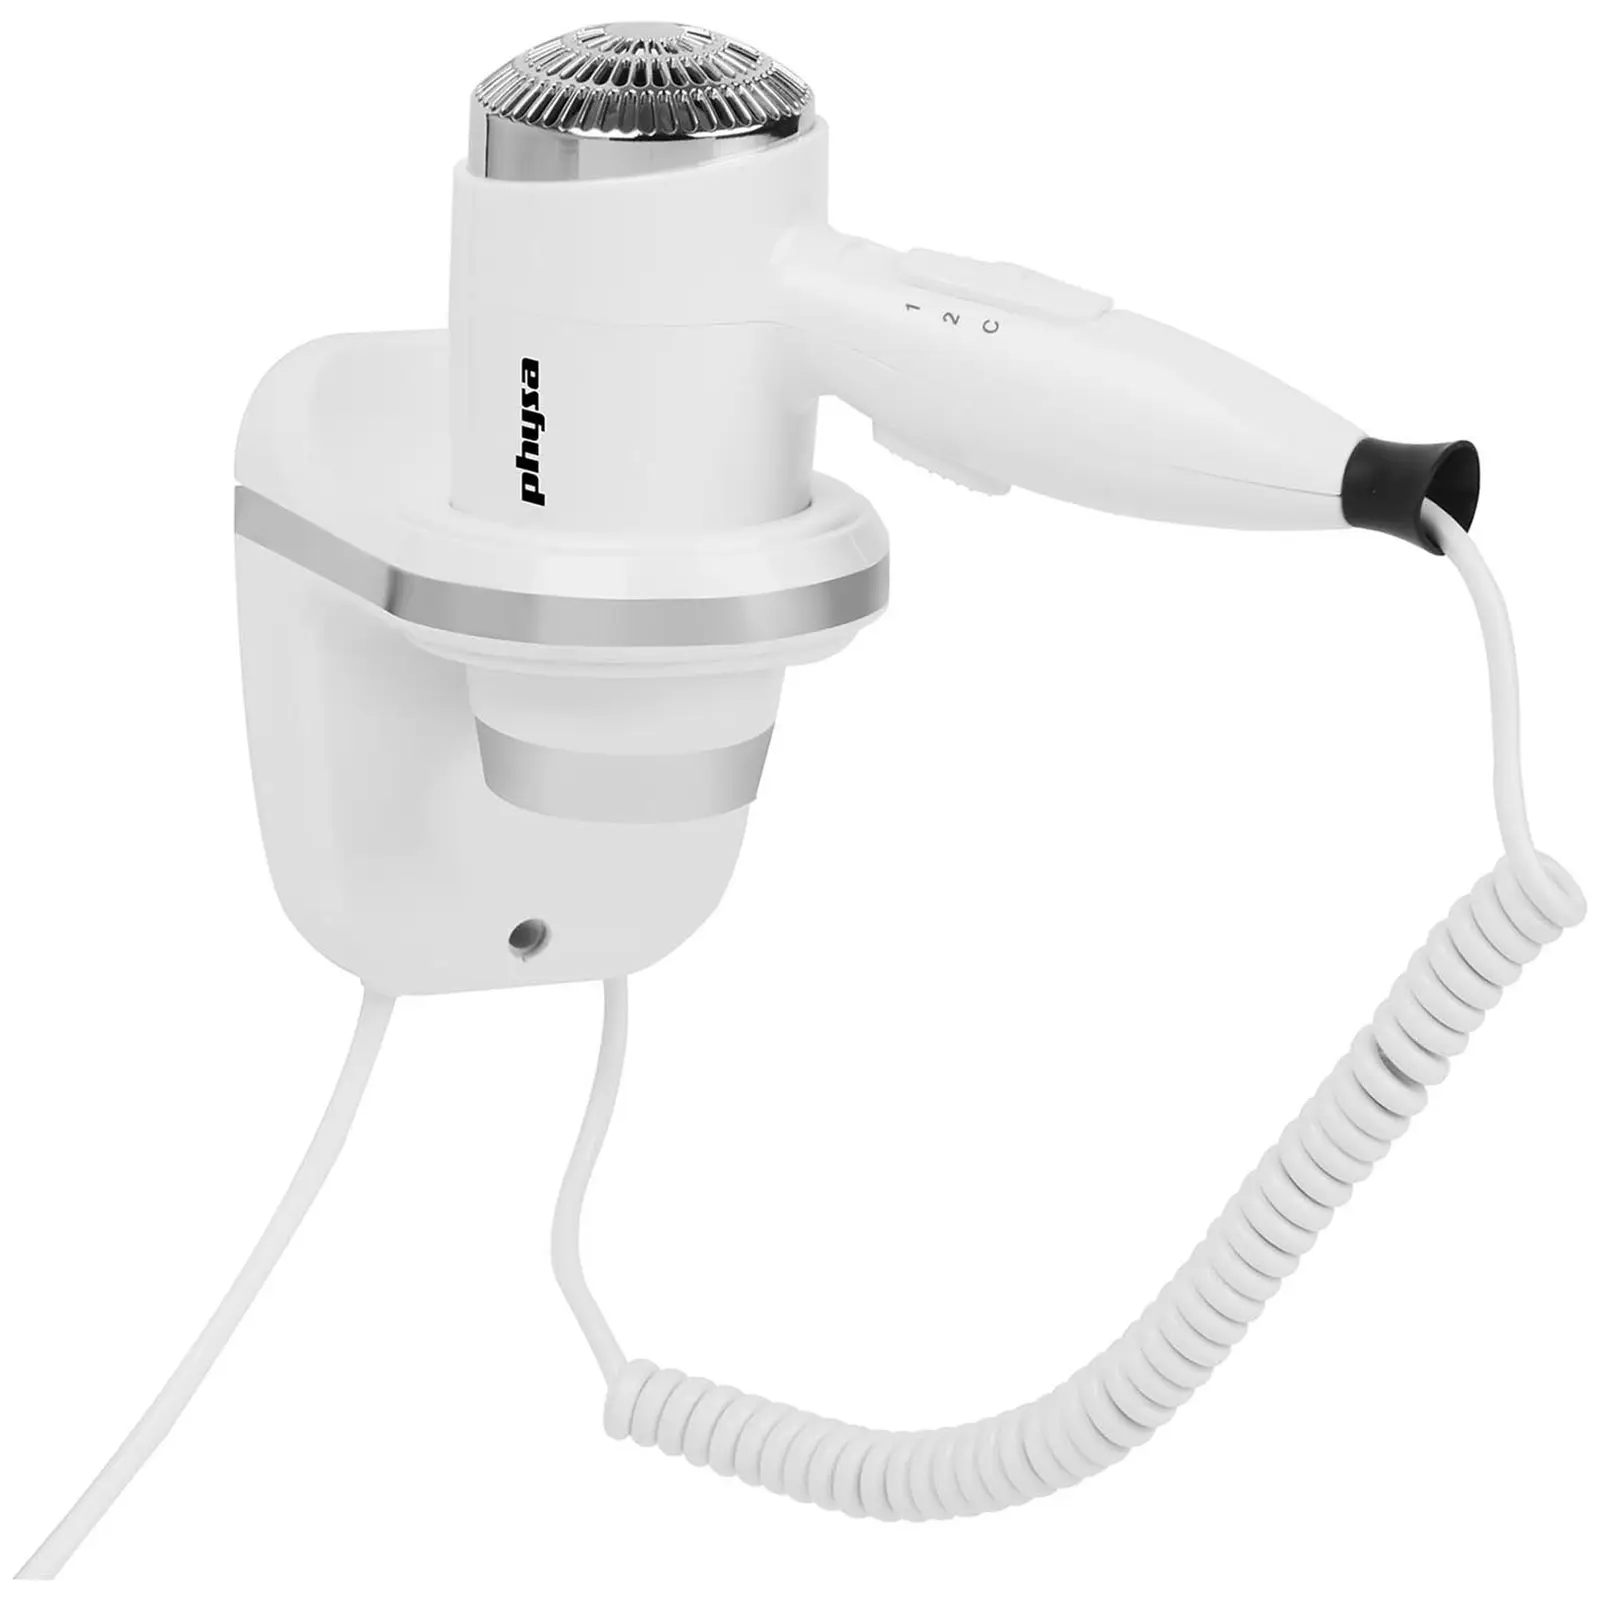 Factory second Hotel Hair Dryer - 1600 W - White